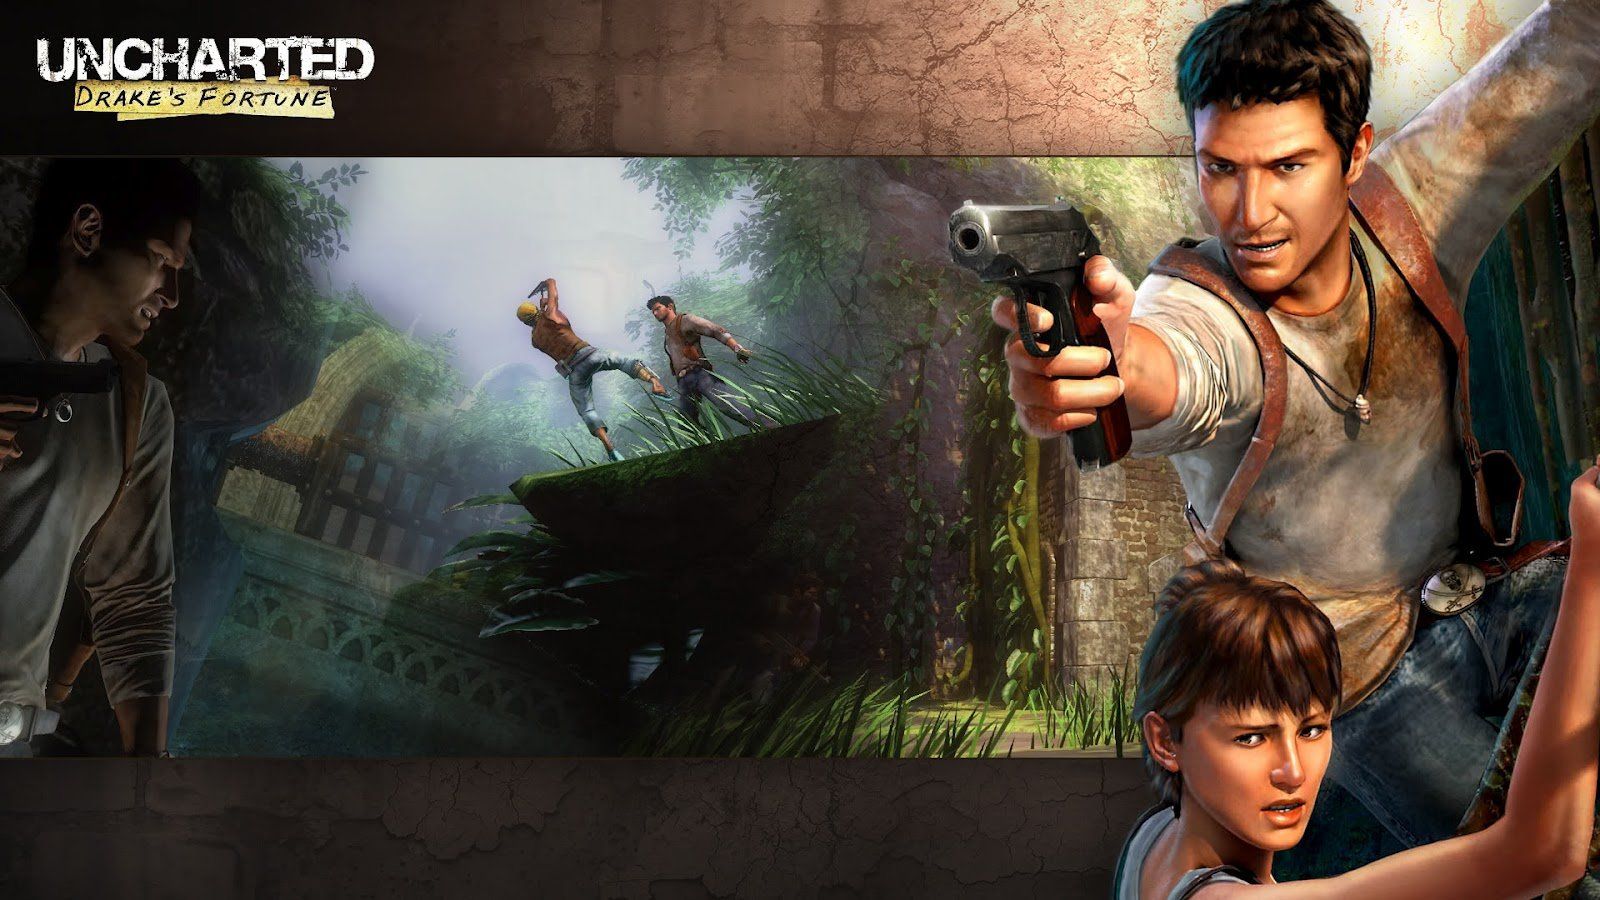 Free download Uncharted1wallpaper4 Uncharted 1 Wallpaper in HD 1080p [1600x900] for your Desktop, Mobile & Tablet. Explore Uncharted 4 Wallpaper HD. Drake HD Wallpaper, Nathan Drake Wallpaper, Uncharted 3 Wallpaper HD